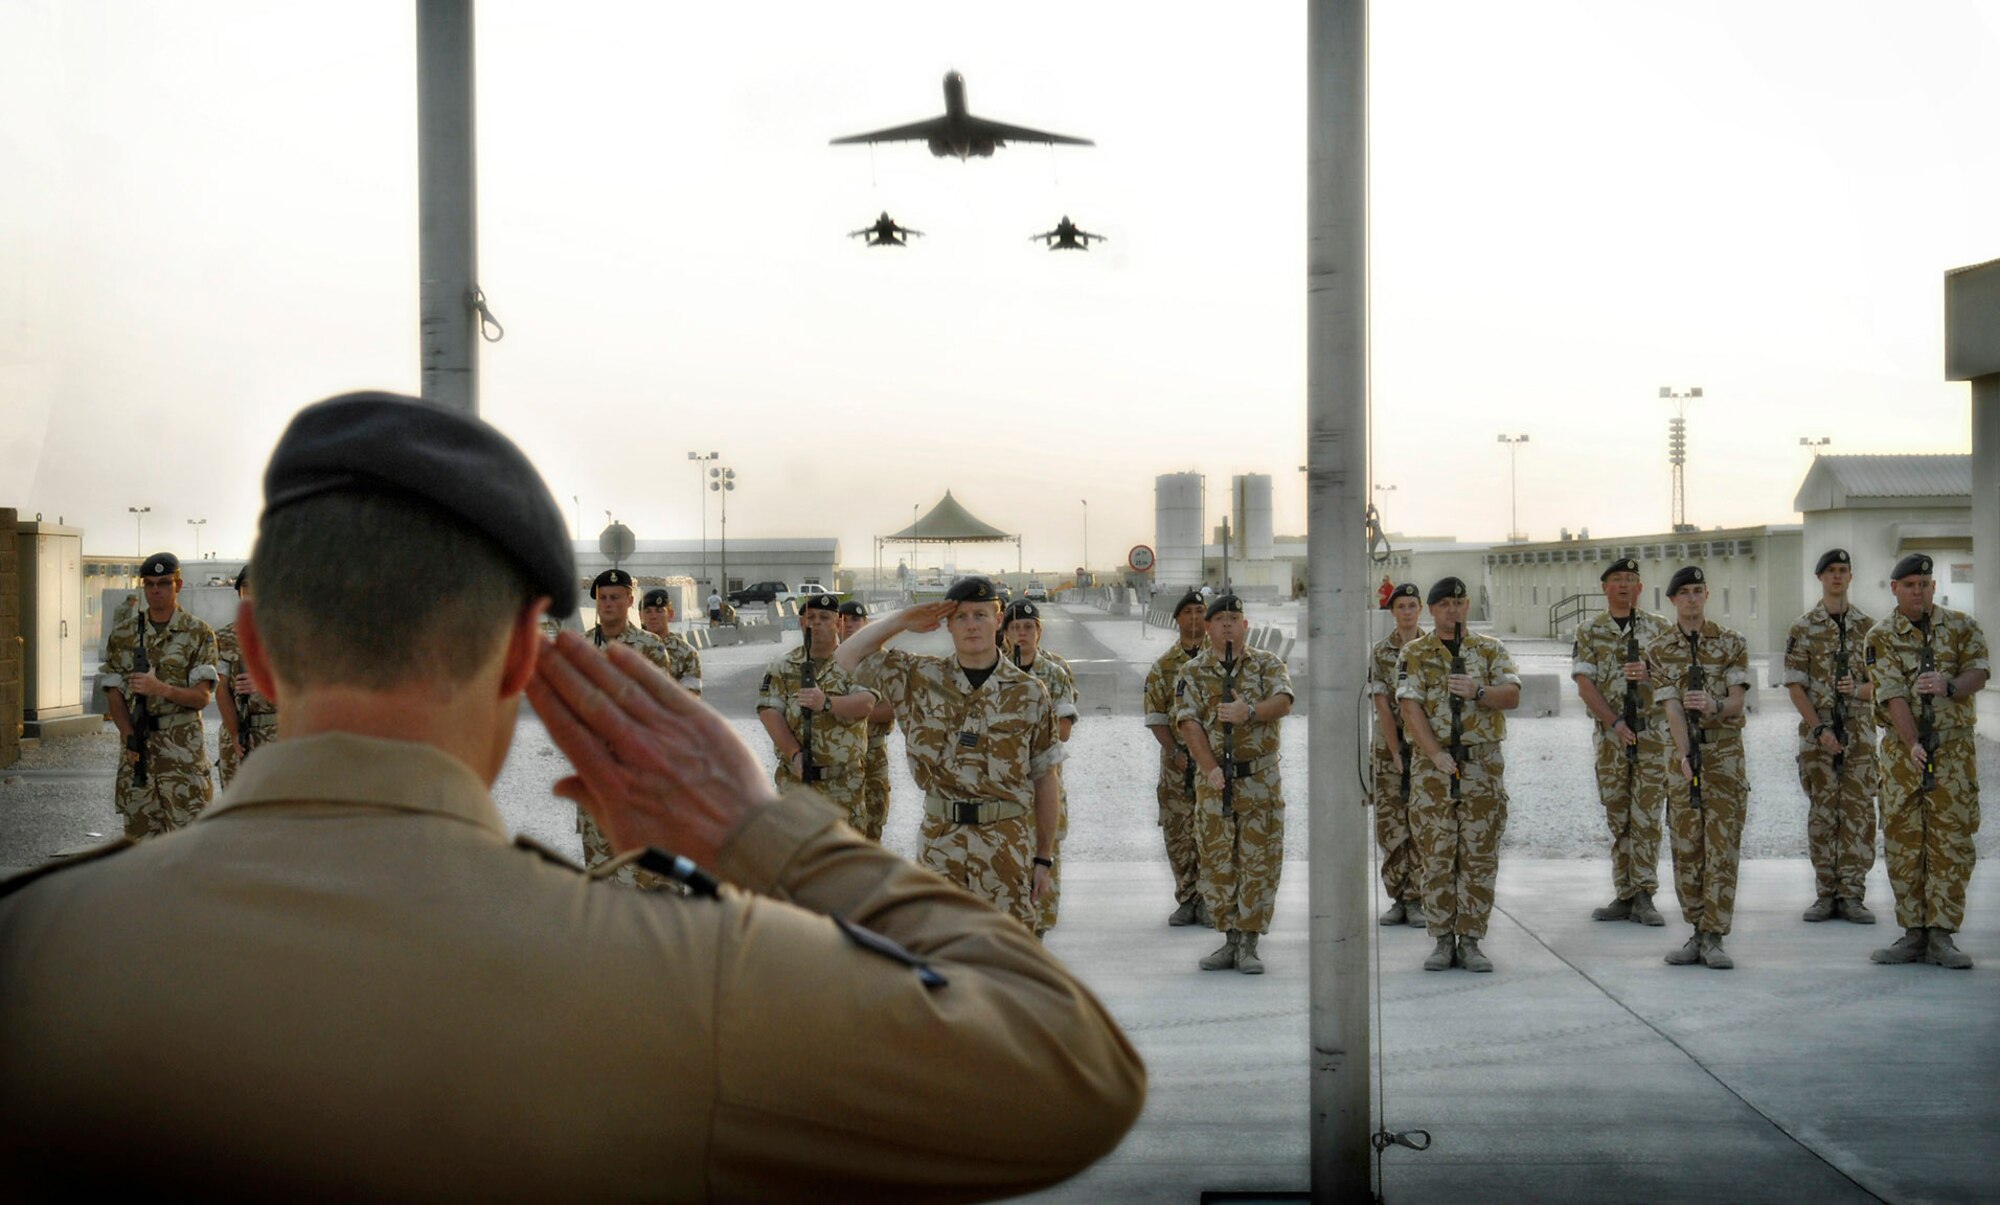 Squadron Leader Mark Wright renders a salute at a sunset ceremony in celebration of the 90th Anniversary of the Royal Air Force, April 1, as two RAF GR-4 Tornados from the 14th Squadron and a VC10 tanker from the Number 101 Squadron perform a fly over. The ceremony concluded with the raising of the Royal Air Force Ensign toward the sky. (RAF photo/Sergeant Gary Morgan)